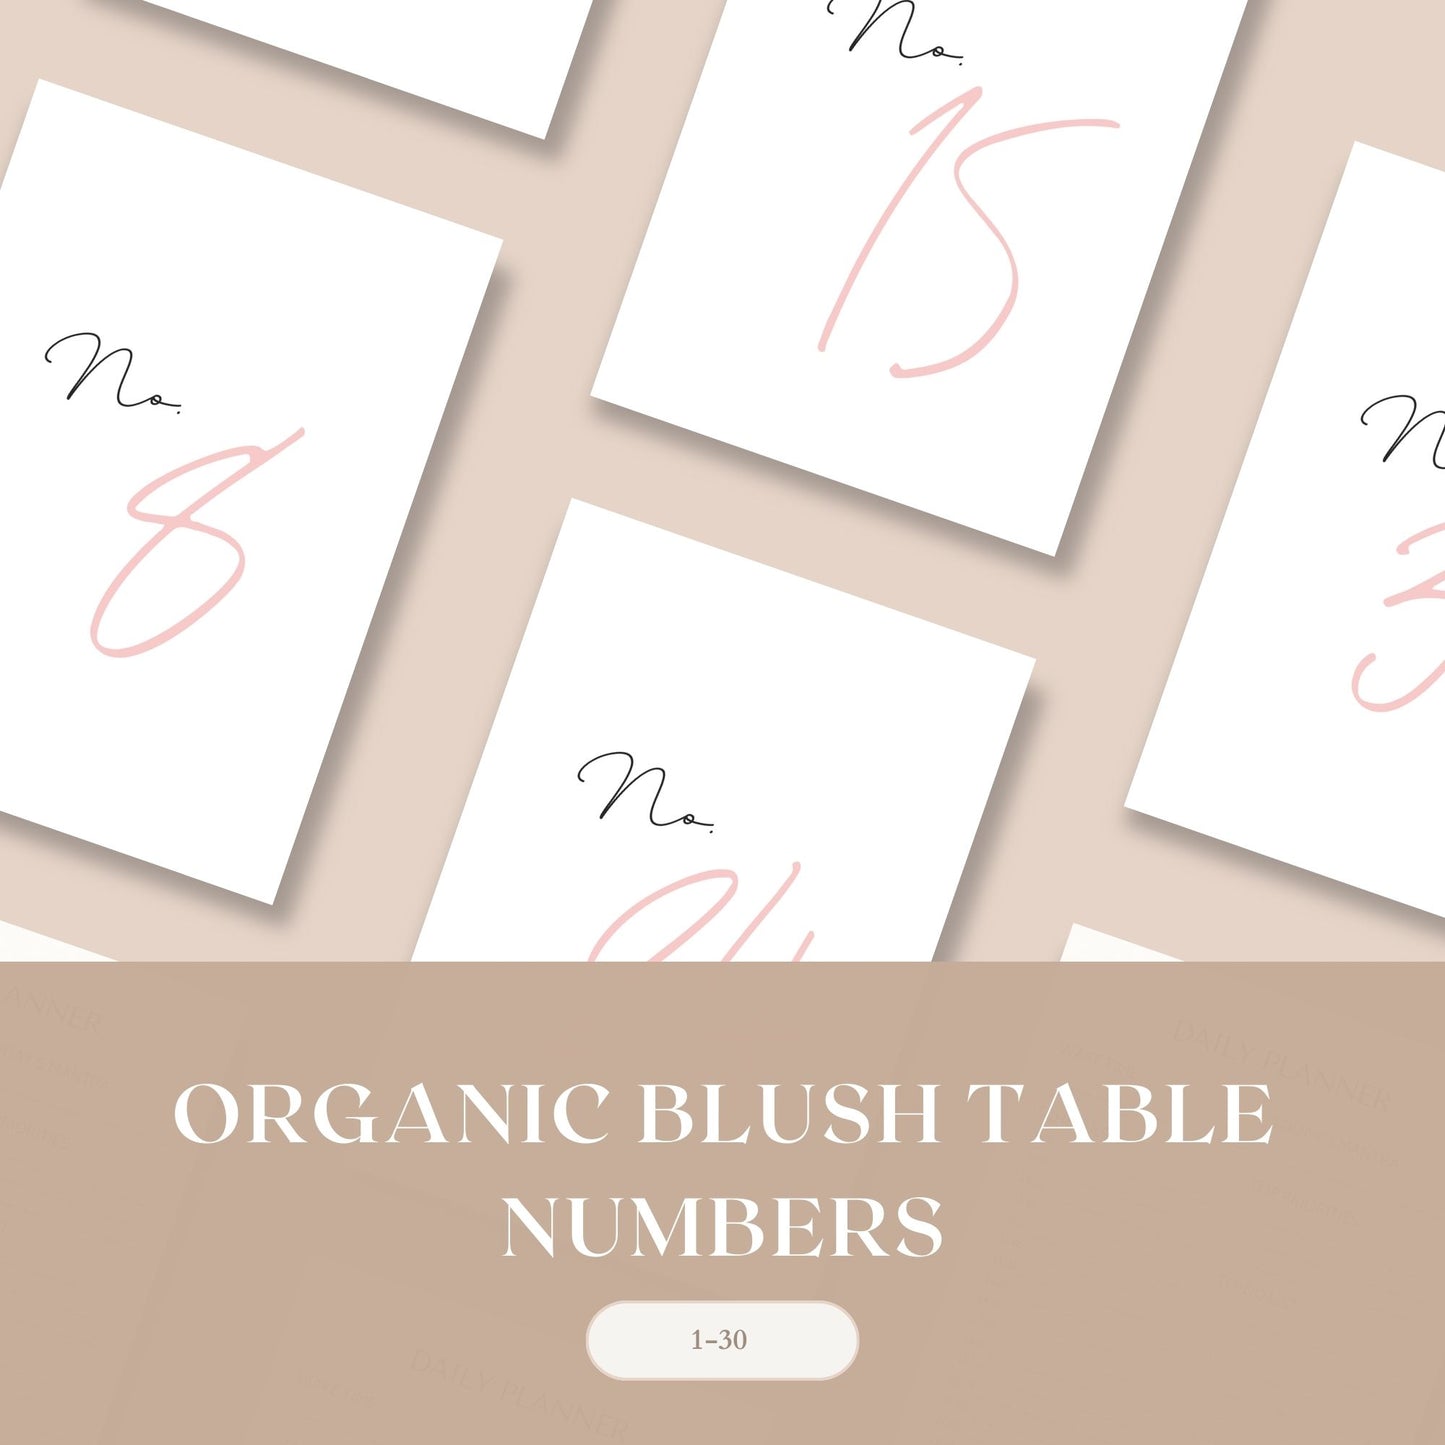 Blush Organic Table Numbers Template | 4x6 Table Numbers Printable | Modern Blush Wedding Table Numbers | Simple Wedding | Download in Canva